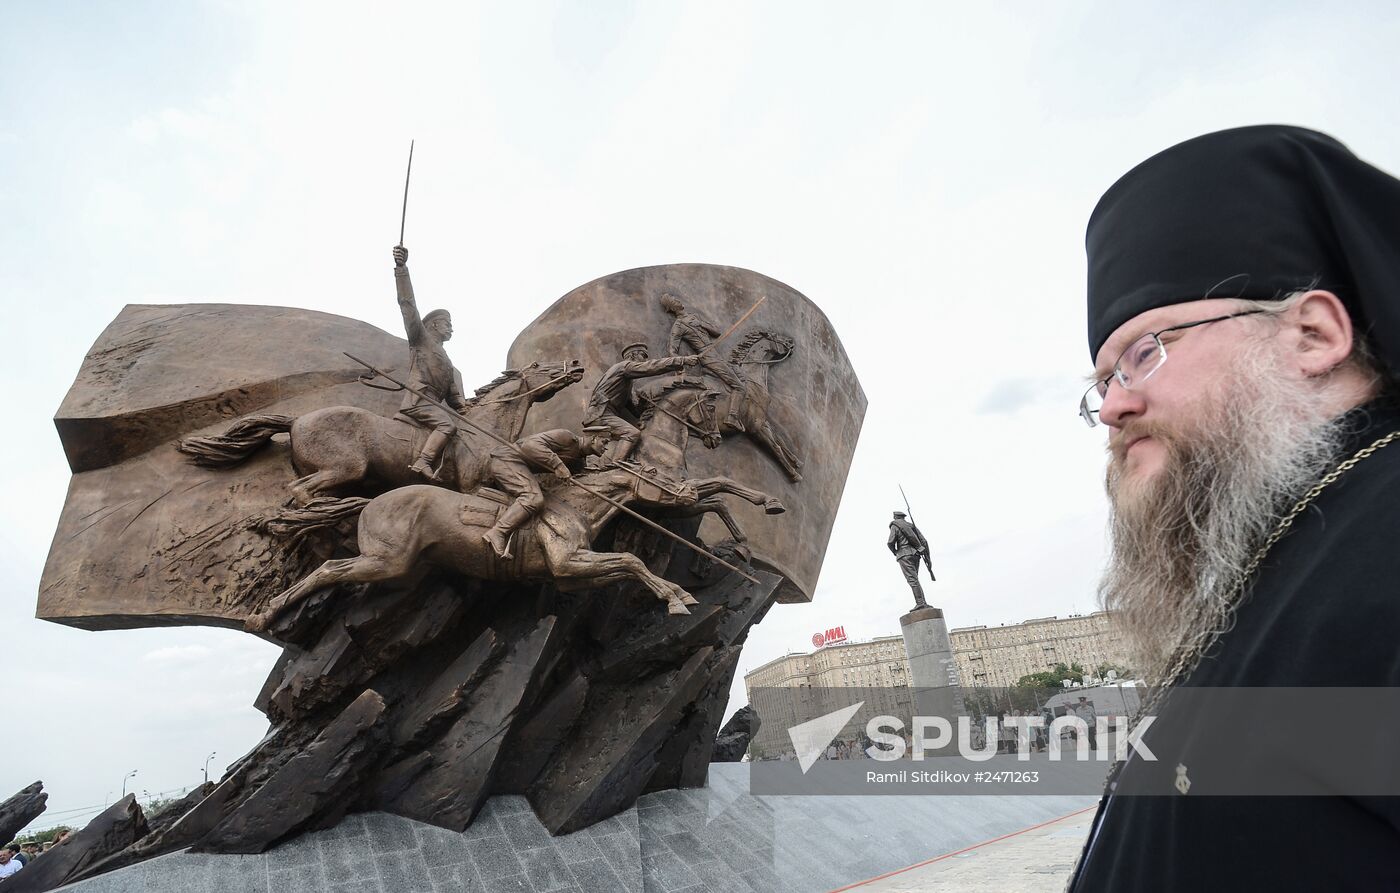 Vladimir Putin attends ceremony to unveil monument to World War I heroes